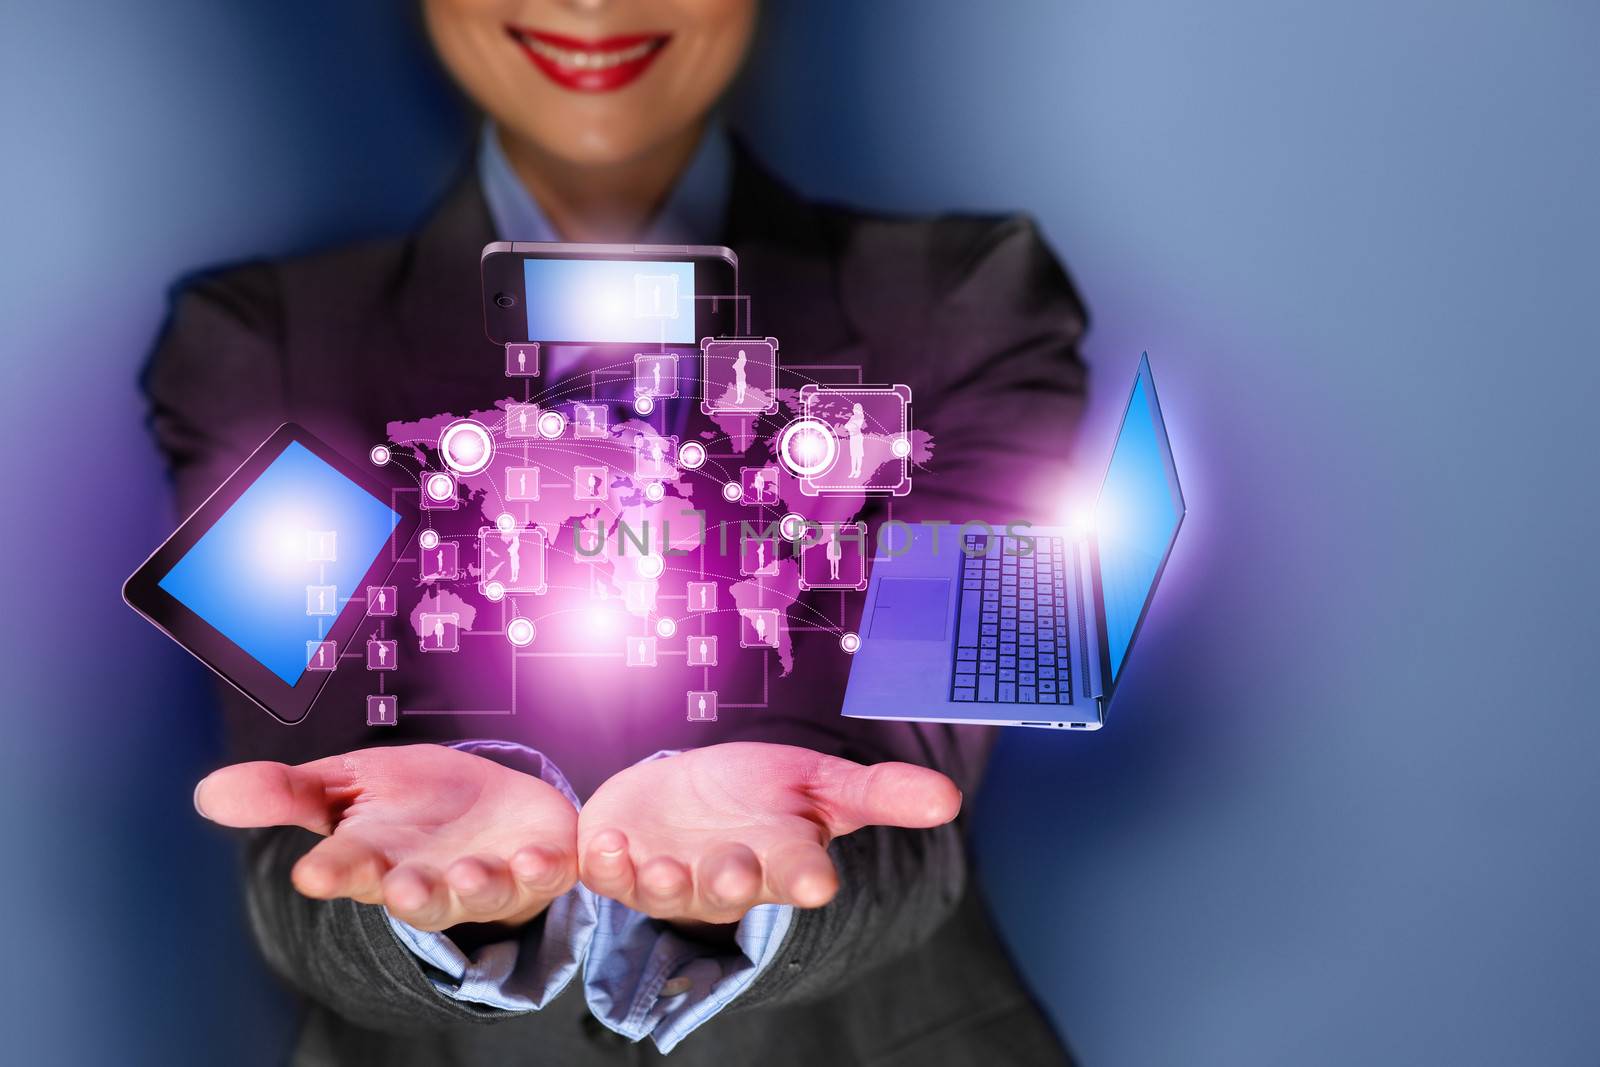 Close up image of businesswoman with 3d images of devices in her hands